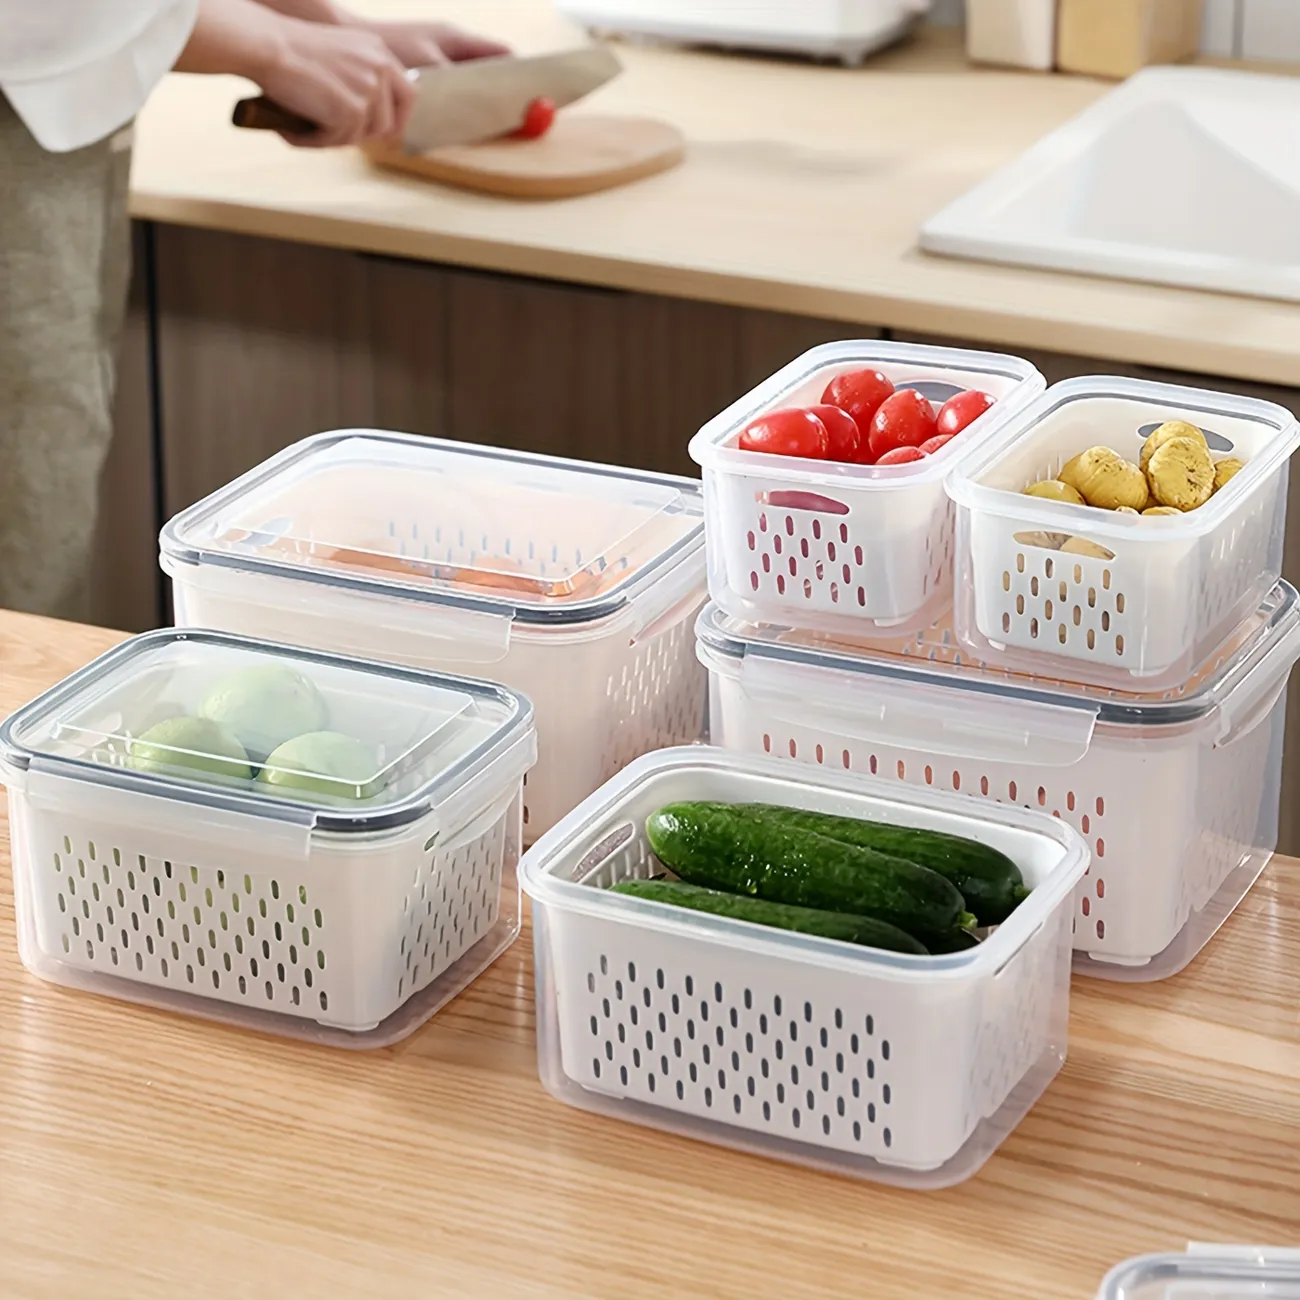 Fridge Storage Containers: Perfect For Storing Fruits, Vegetables